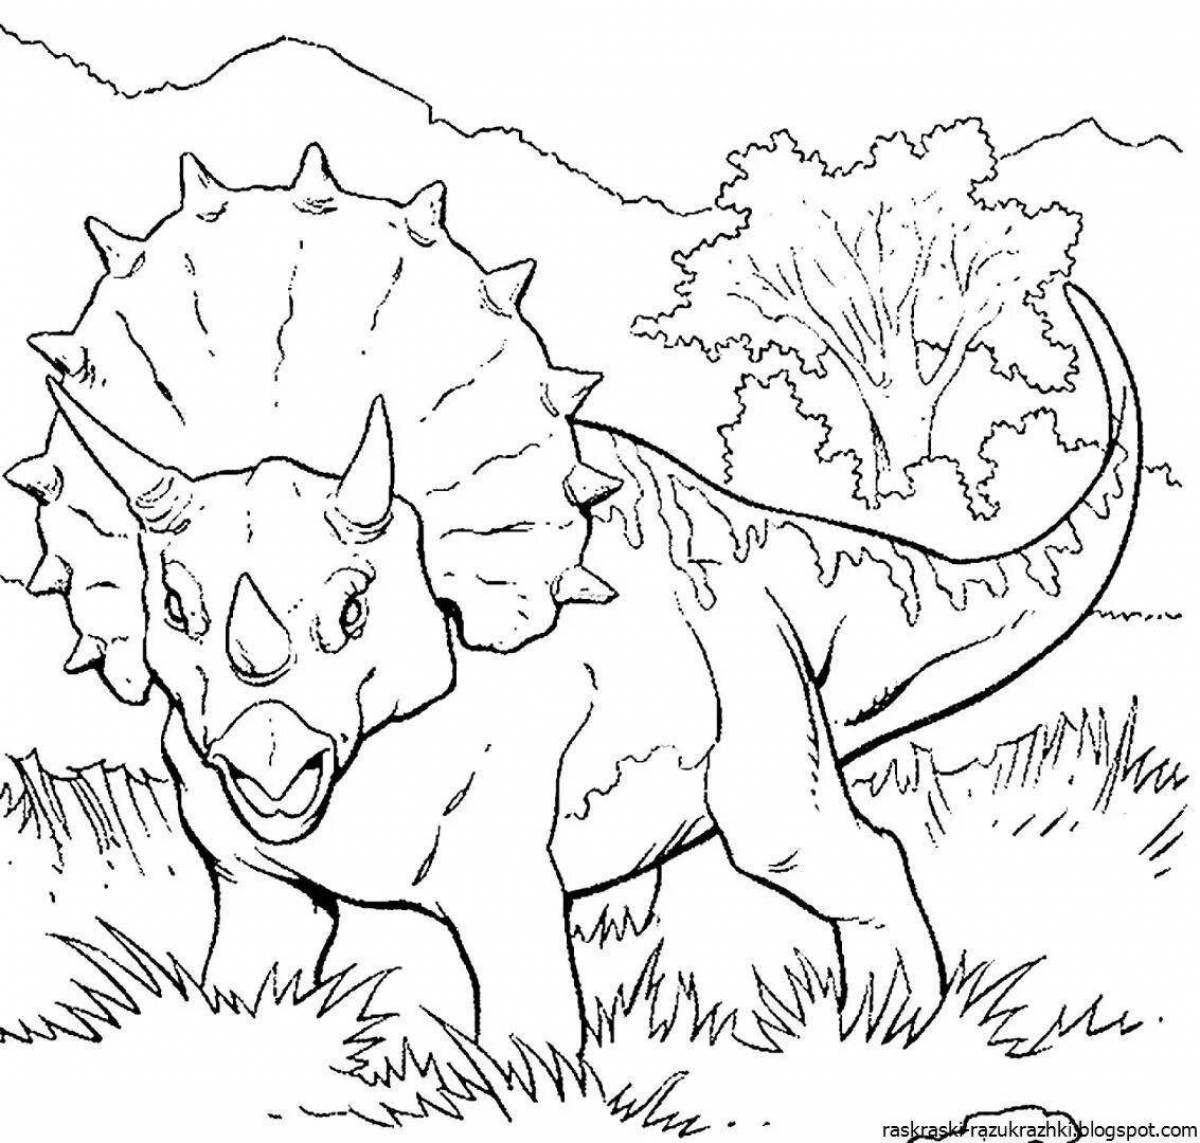 Excellent dinosaur drawings to color in